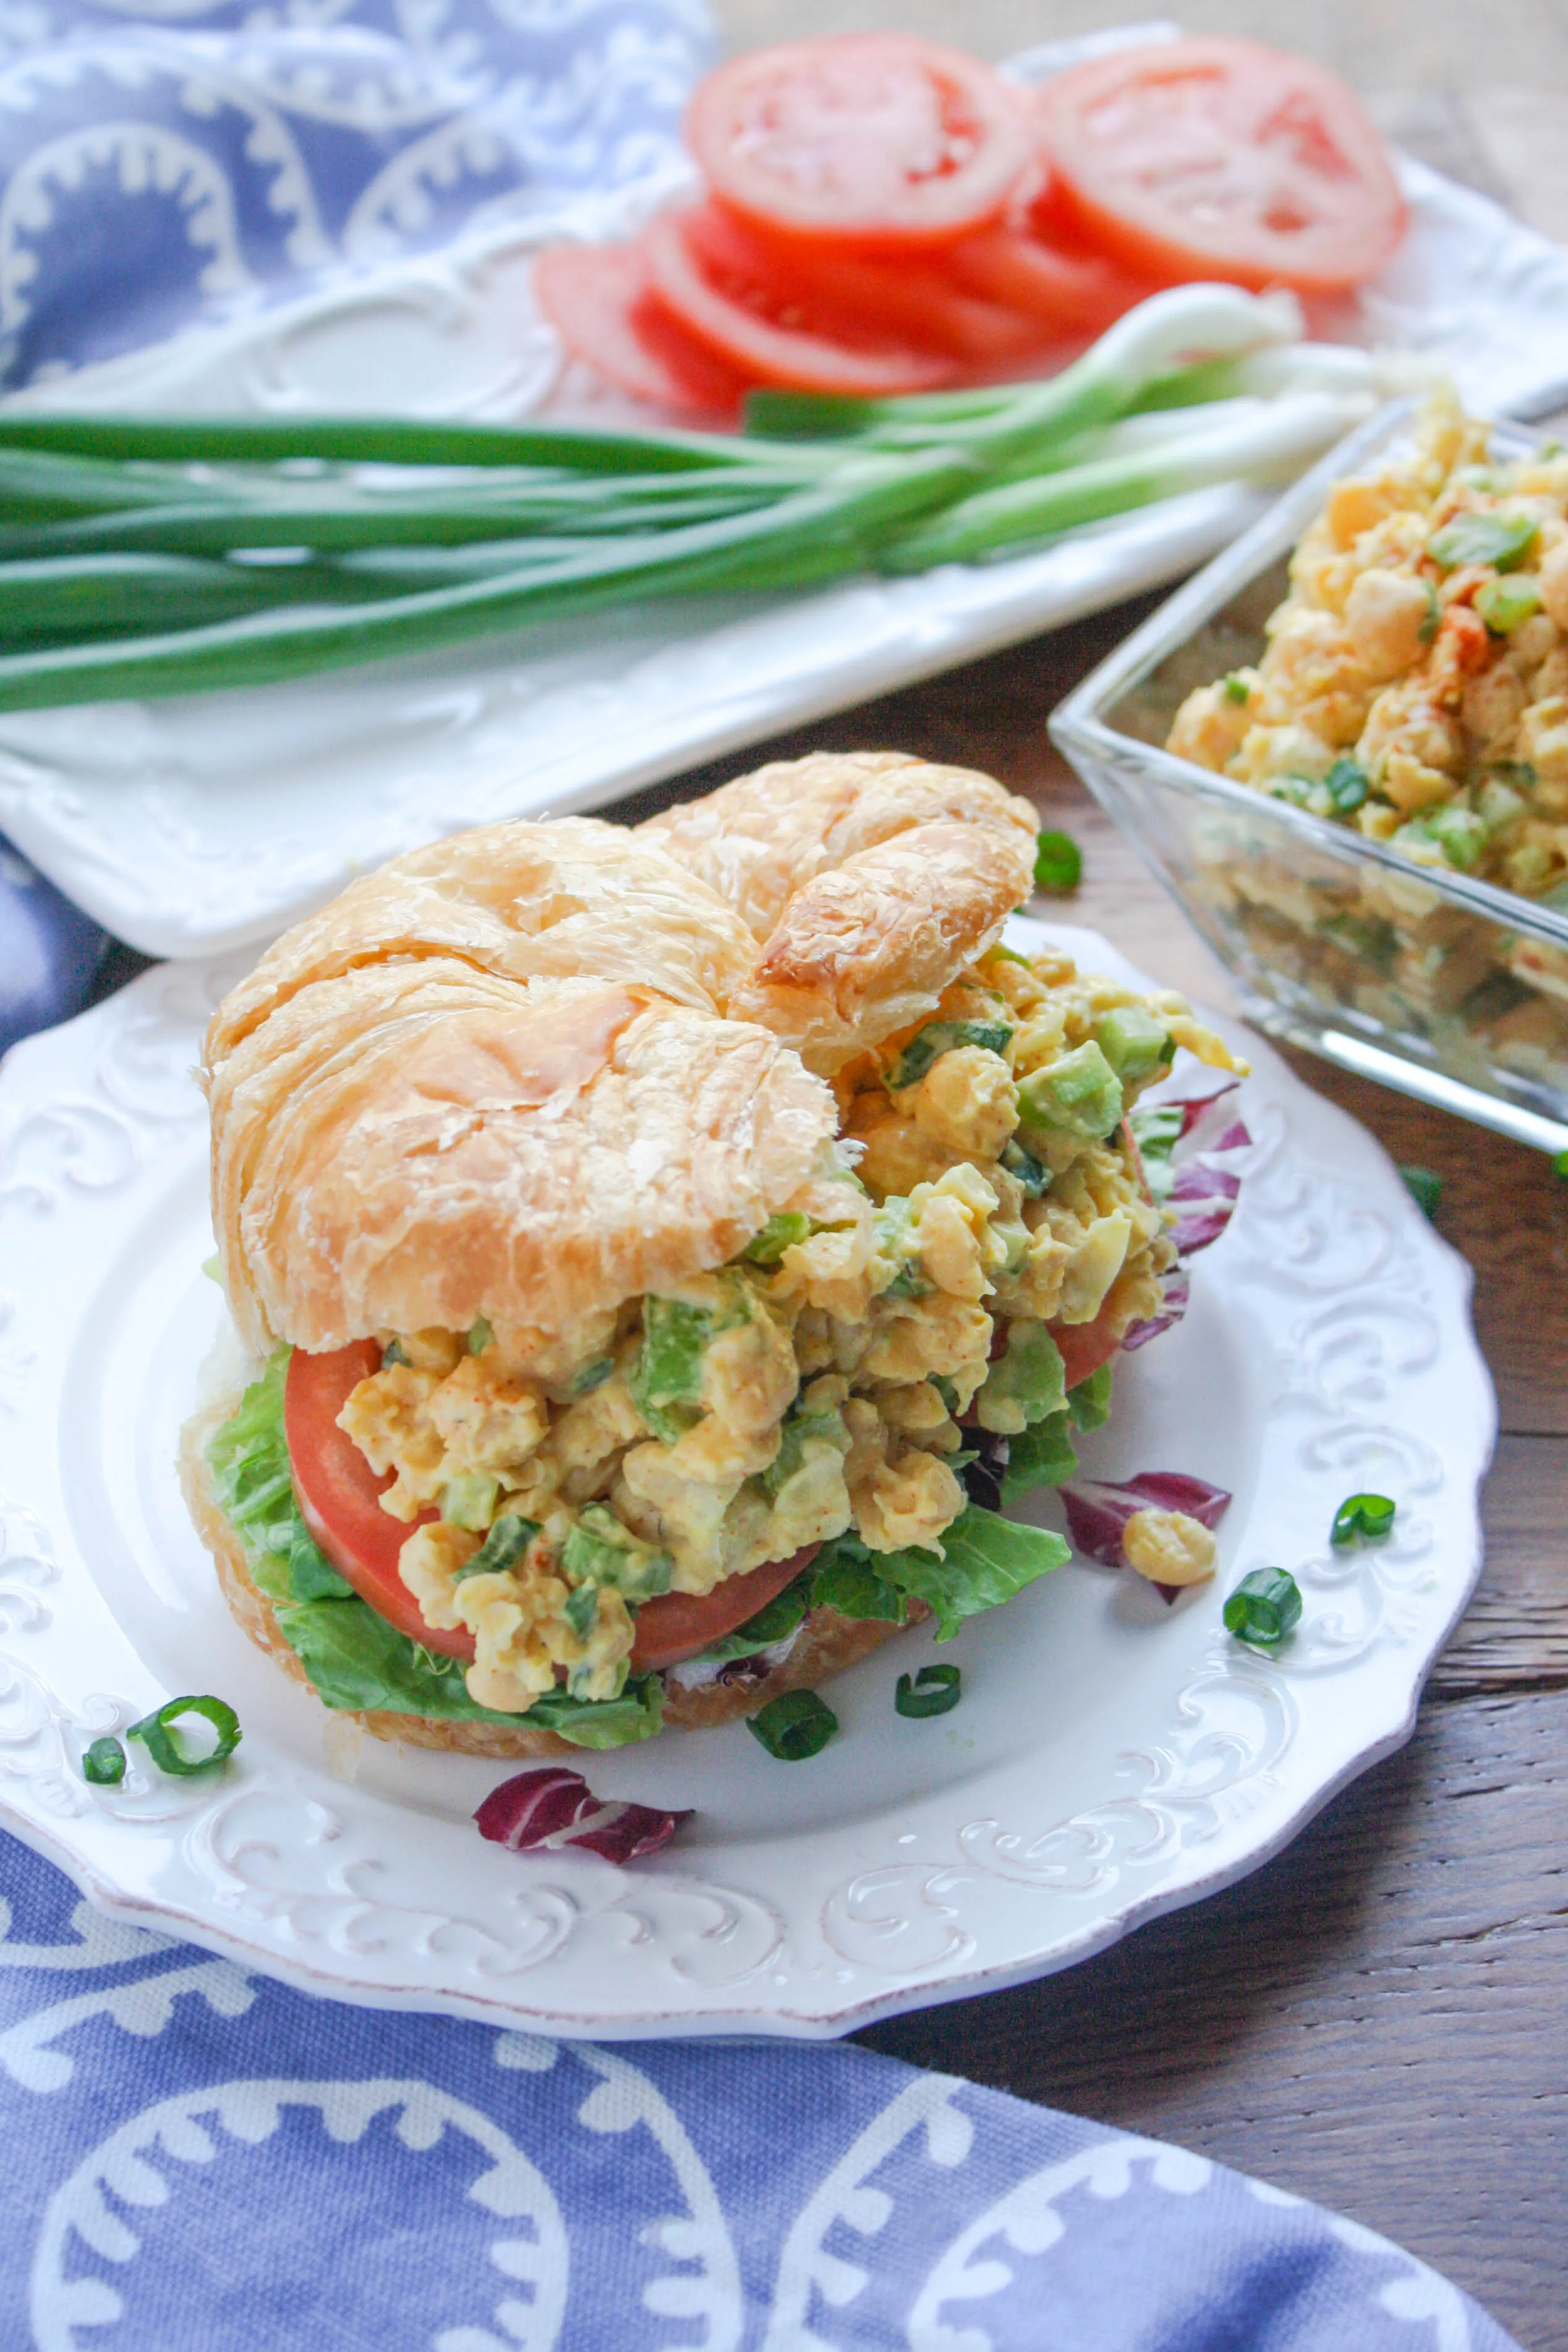 Chickpea Salad Sandwiches are a tasty, meatless option for parties or lunch. These vegetarian sandwiches are so tasty!